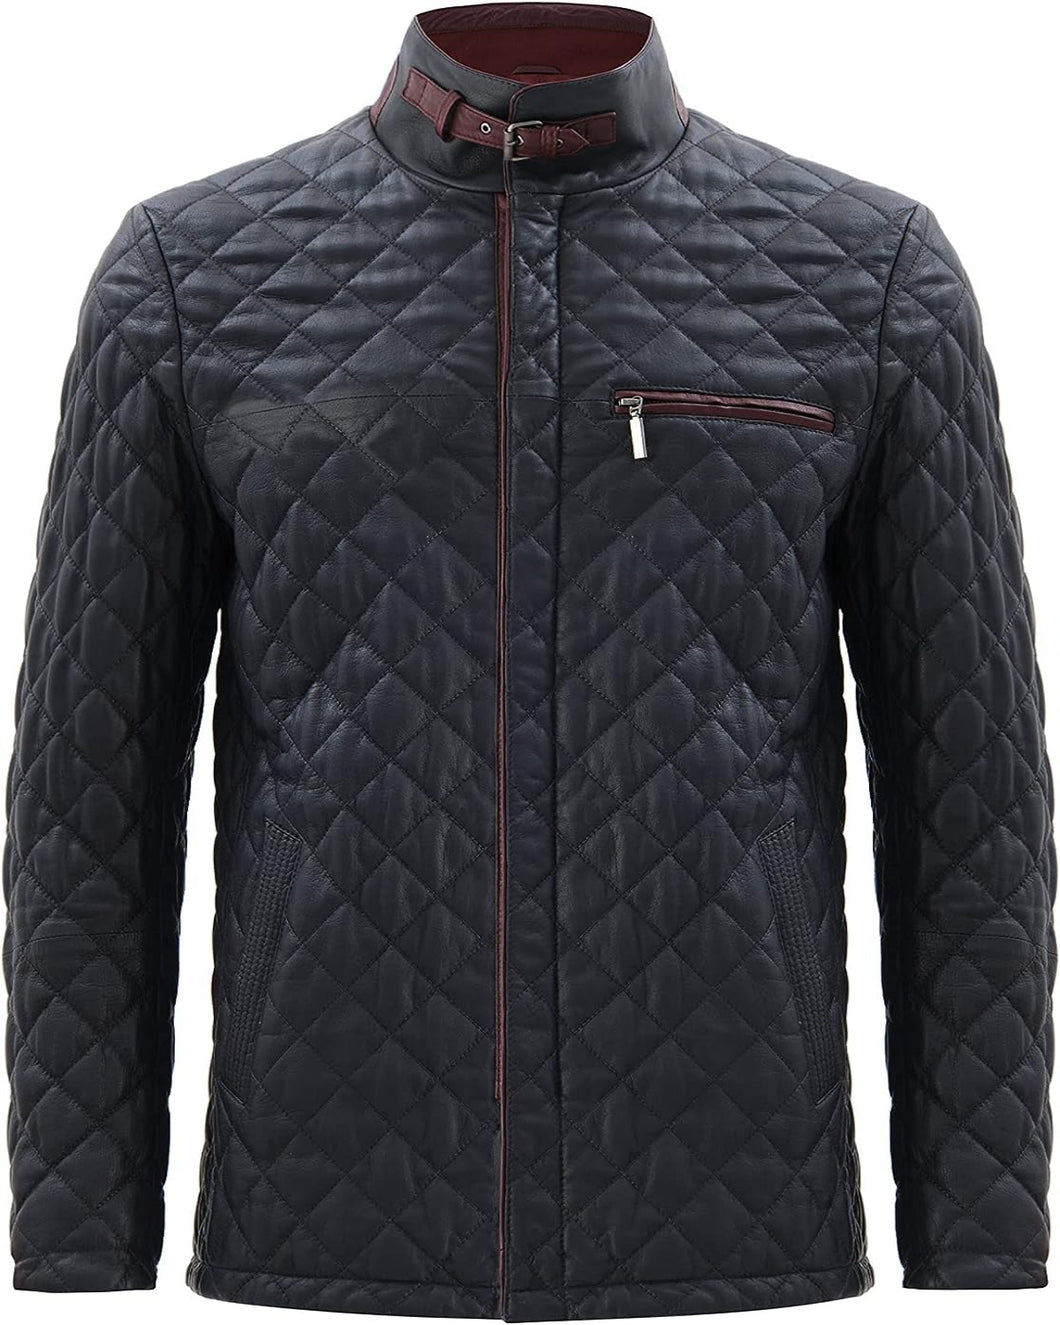 Men's Quilted  Real Leather Jacket